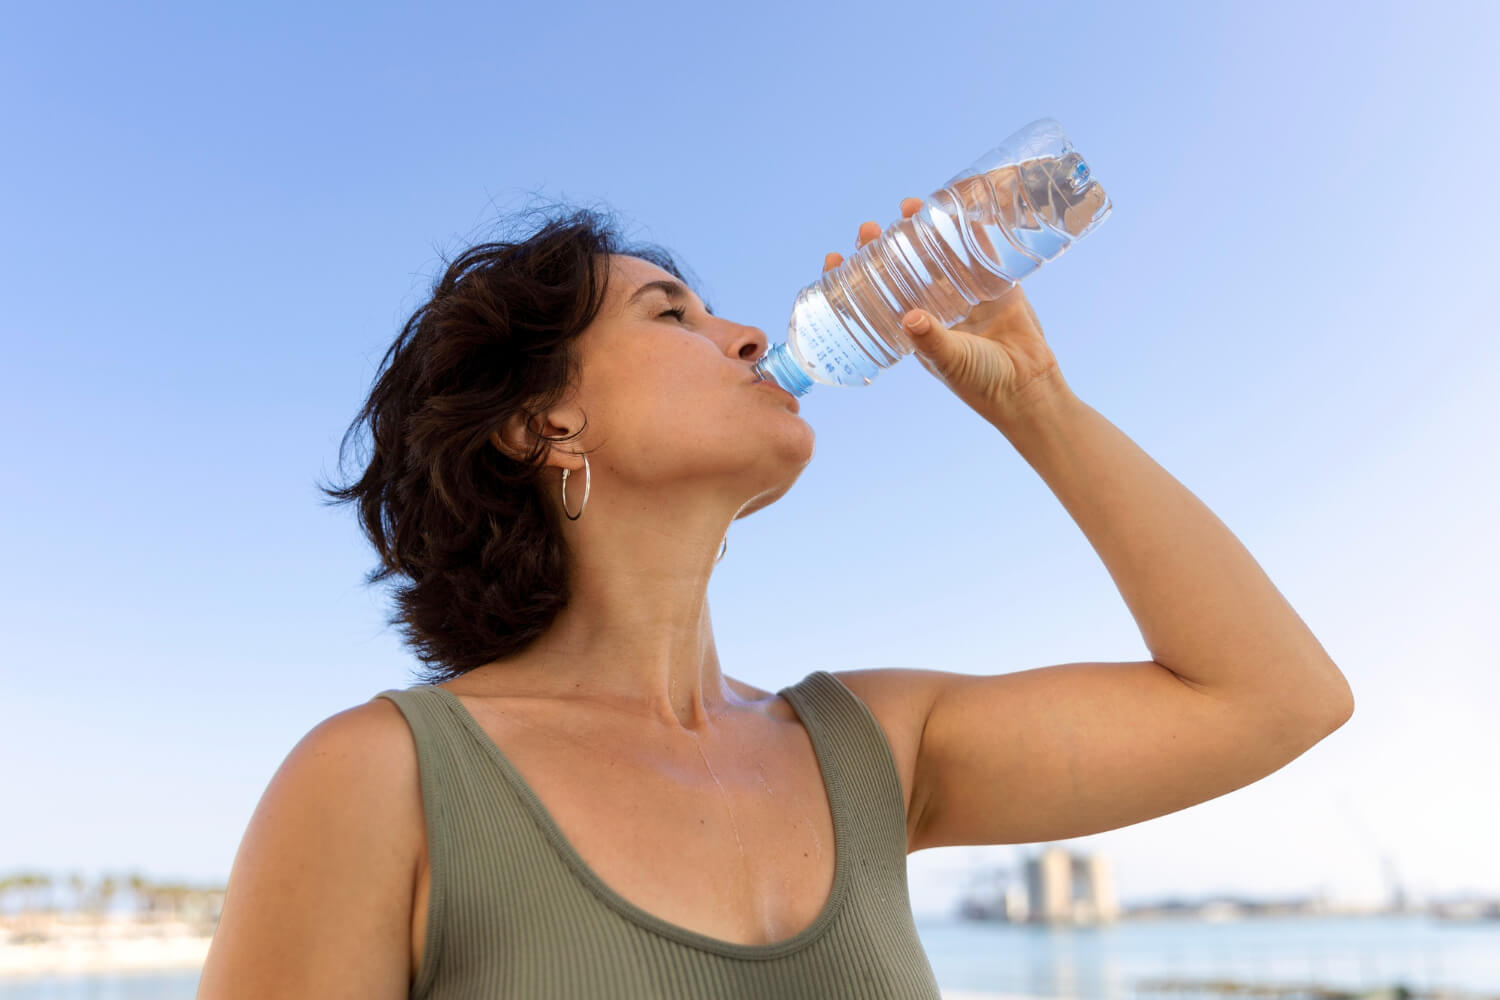 A refreshing photograph featuring a woman gracefully sipping water, promoting oral health and wellness with Trust Dental Care.